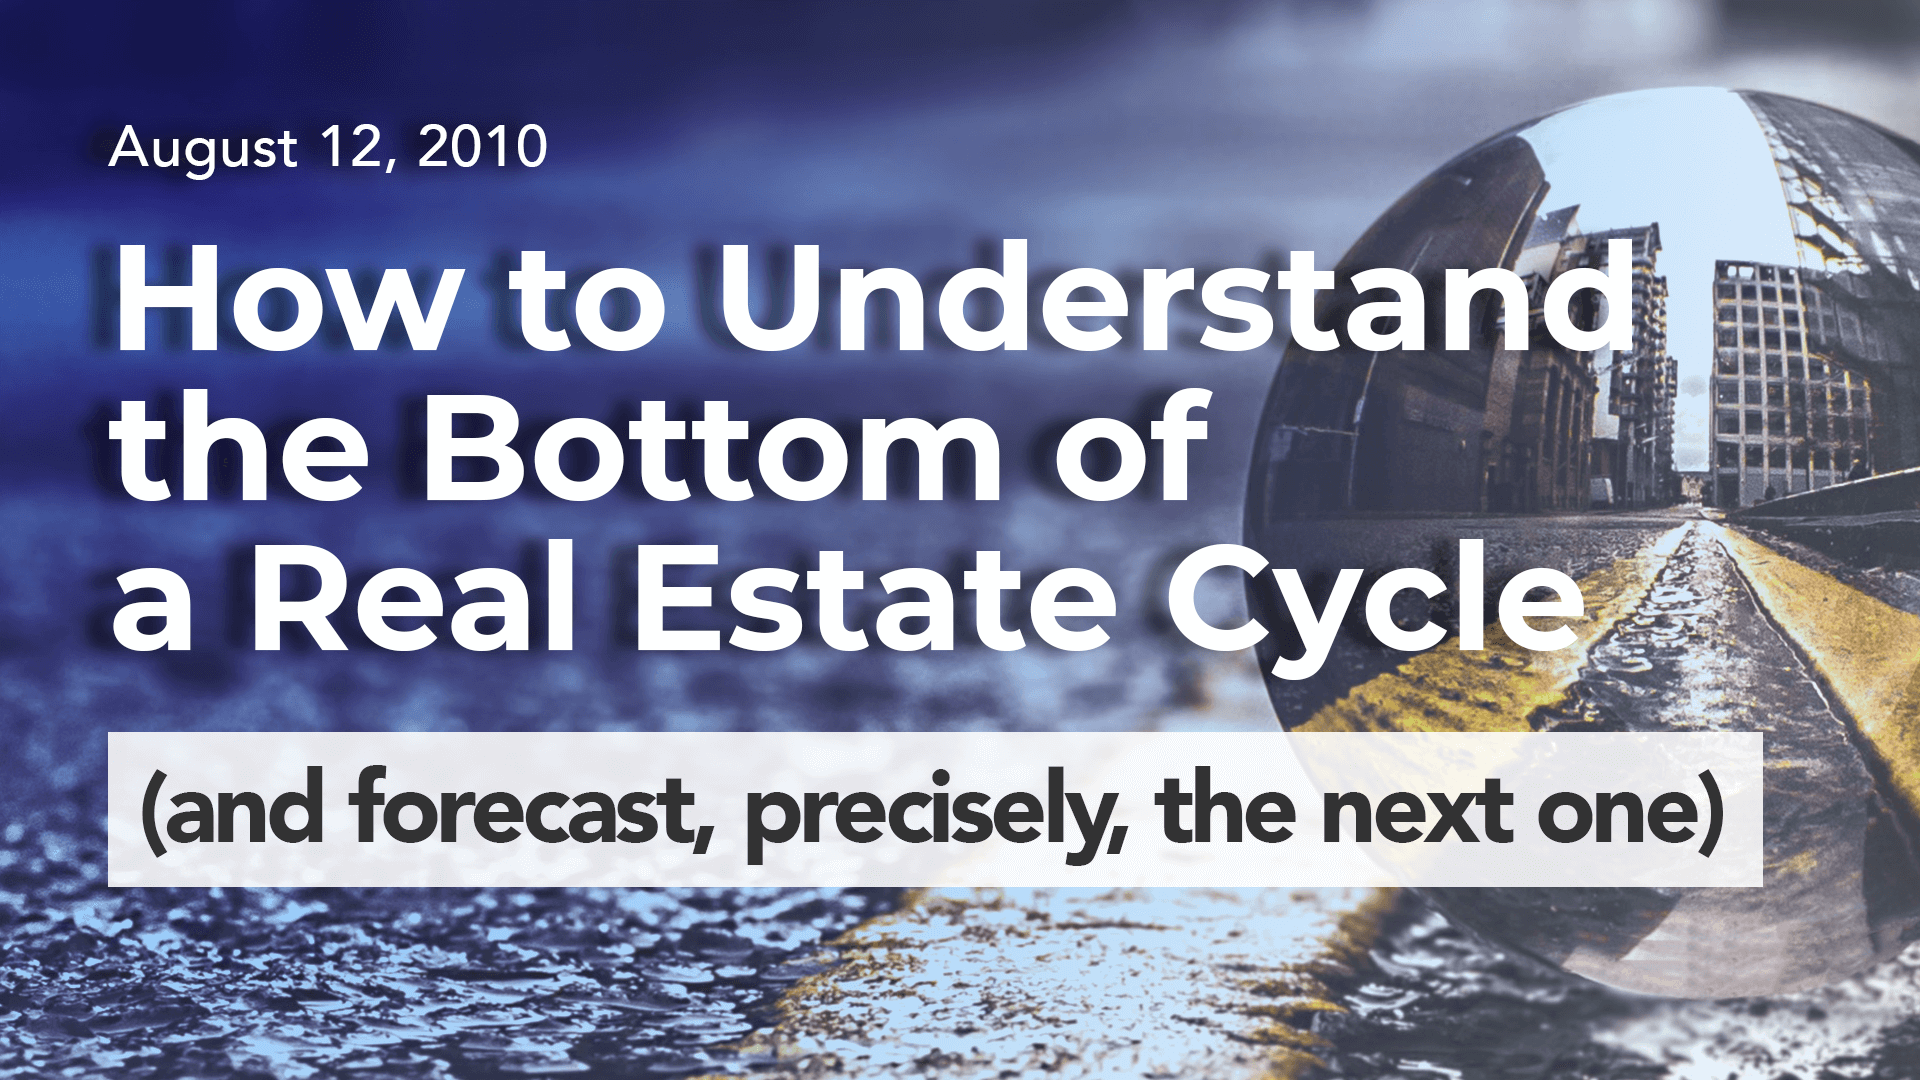 How to Understand the Bottom of a Real Estate Cycle